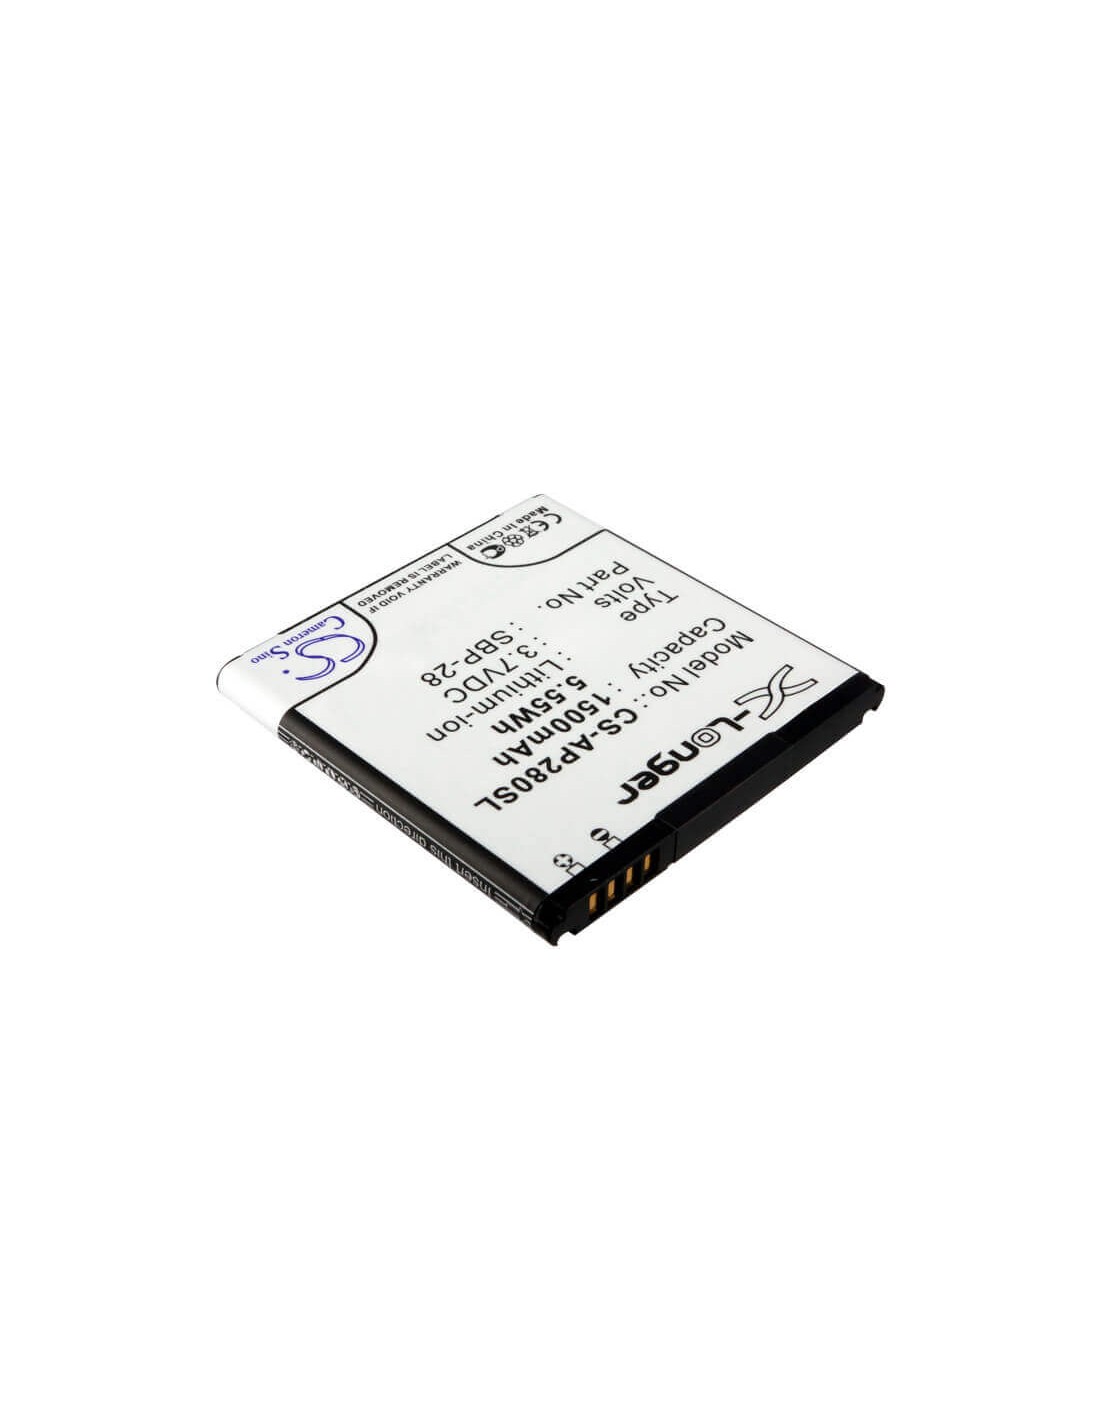 Battery for Asus PadFone, A66, T20 3.7V, 1500mAh - 5.55Wh